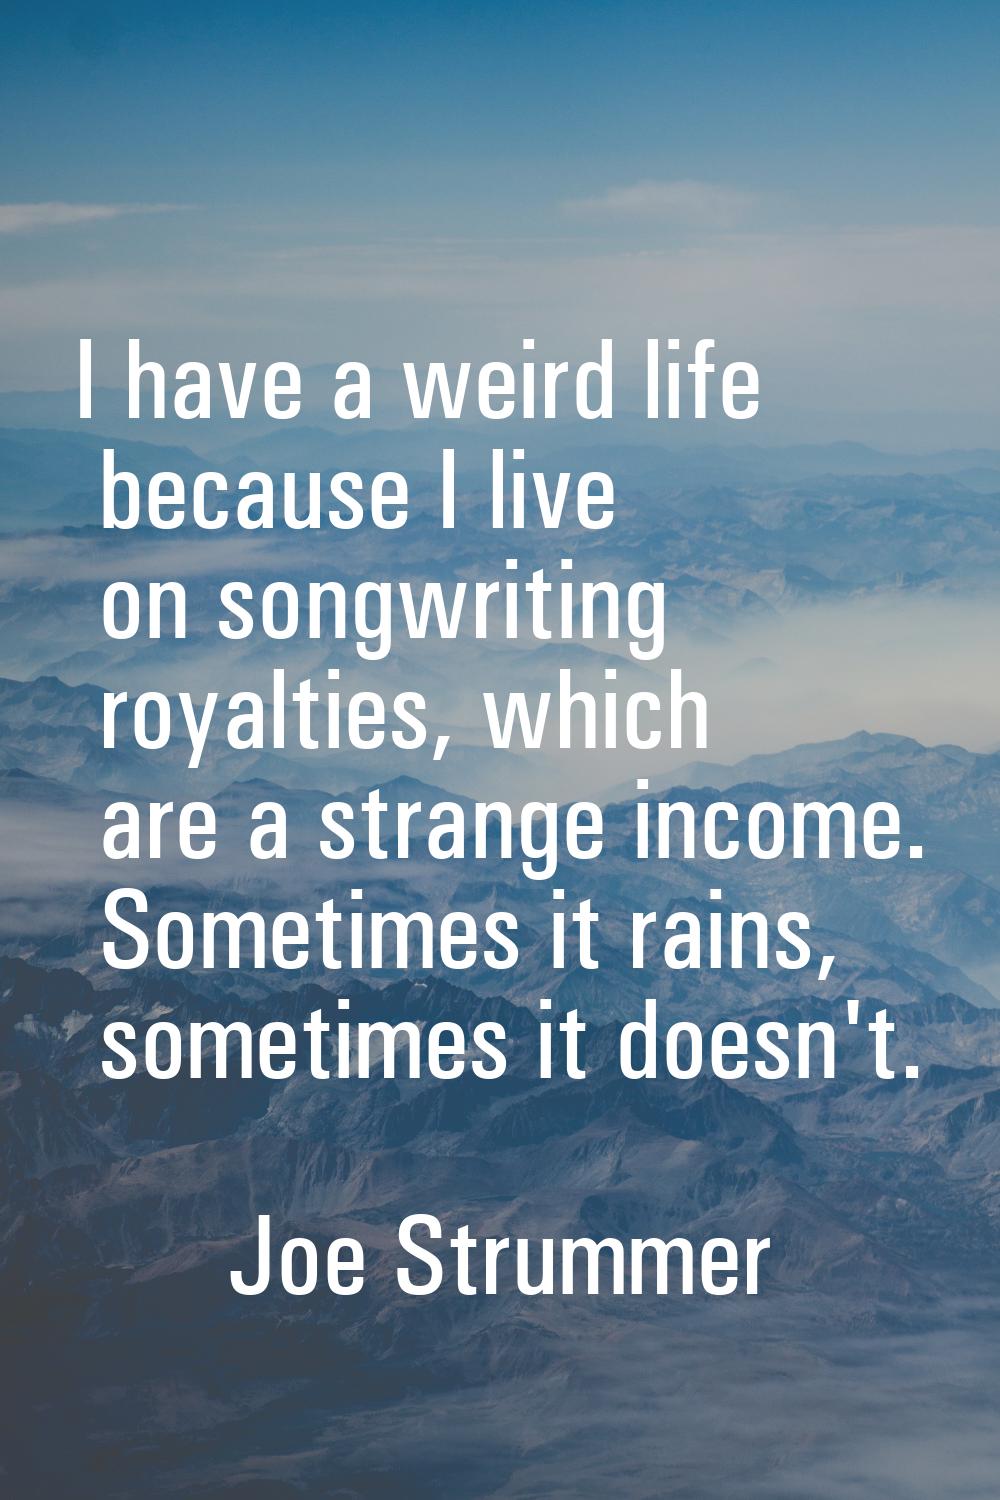 I have a weird life because I live on songwriting royalties, which are a strange income. Sometimes 